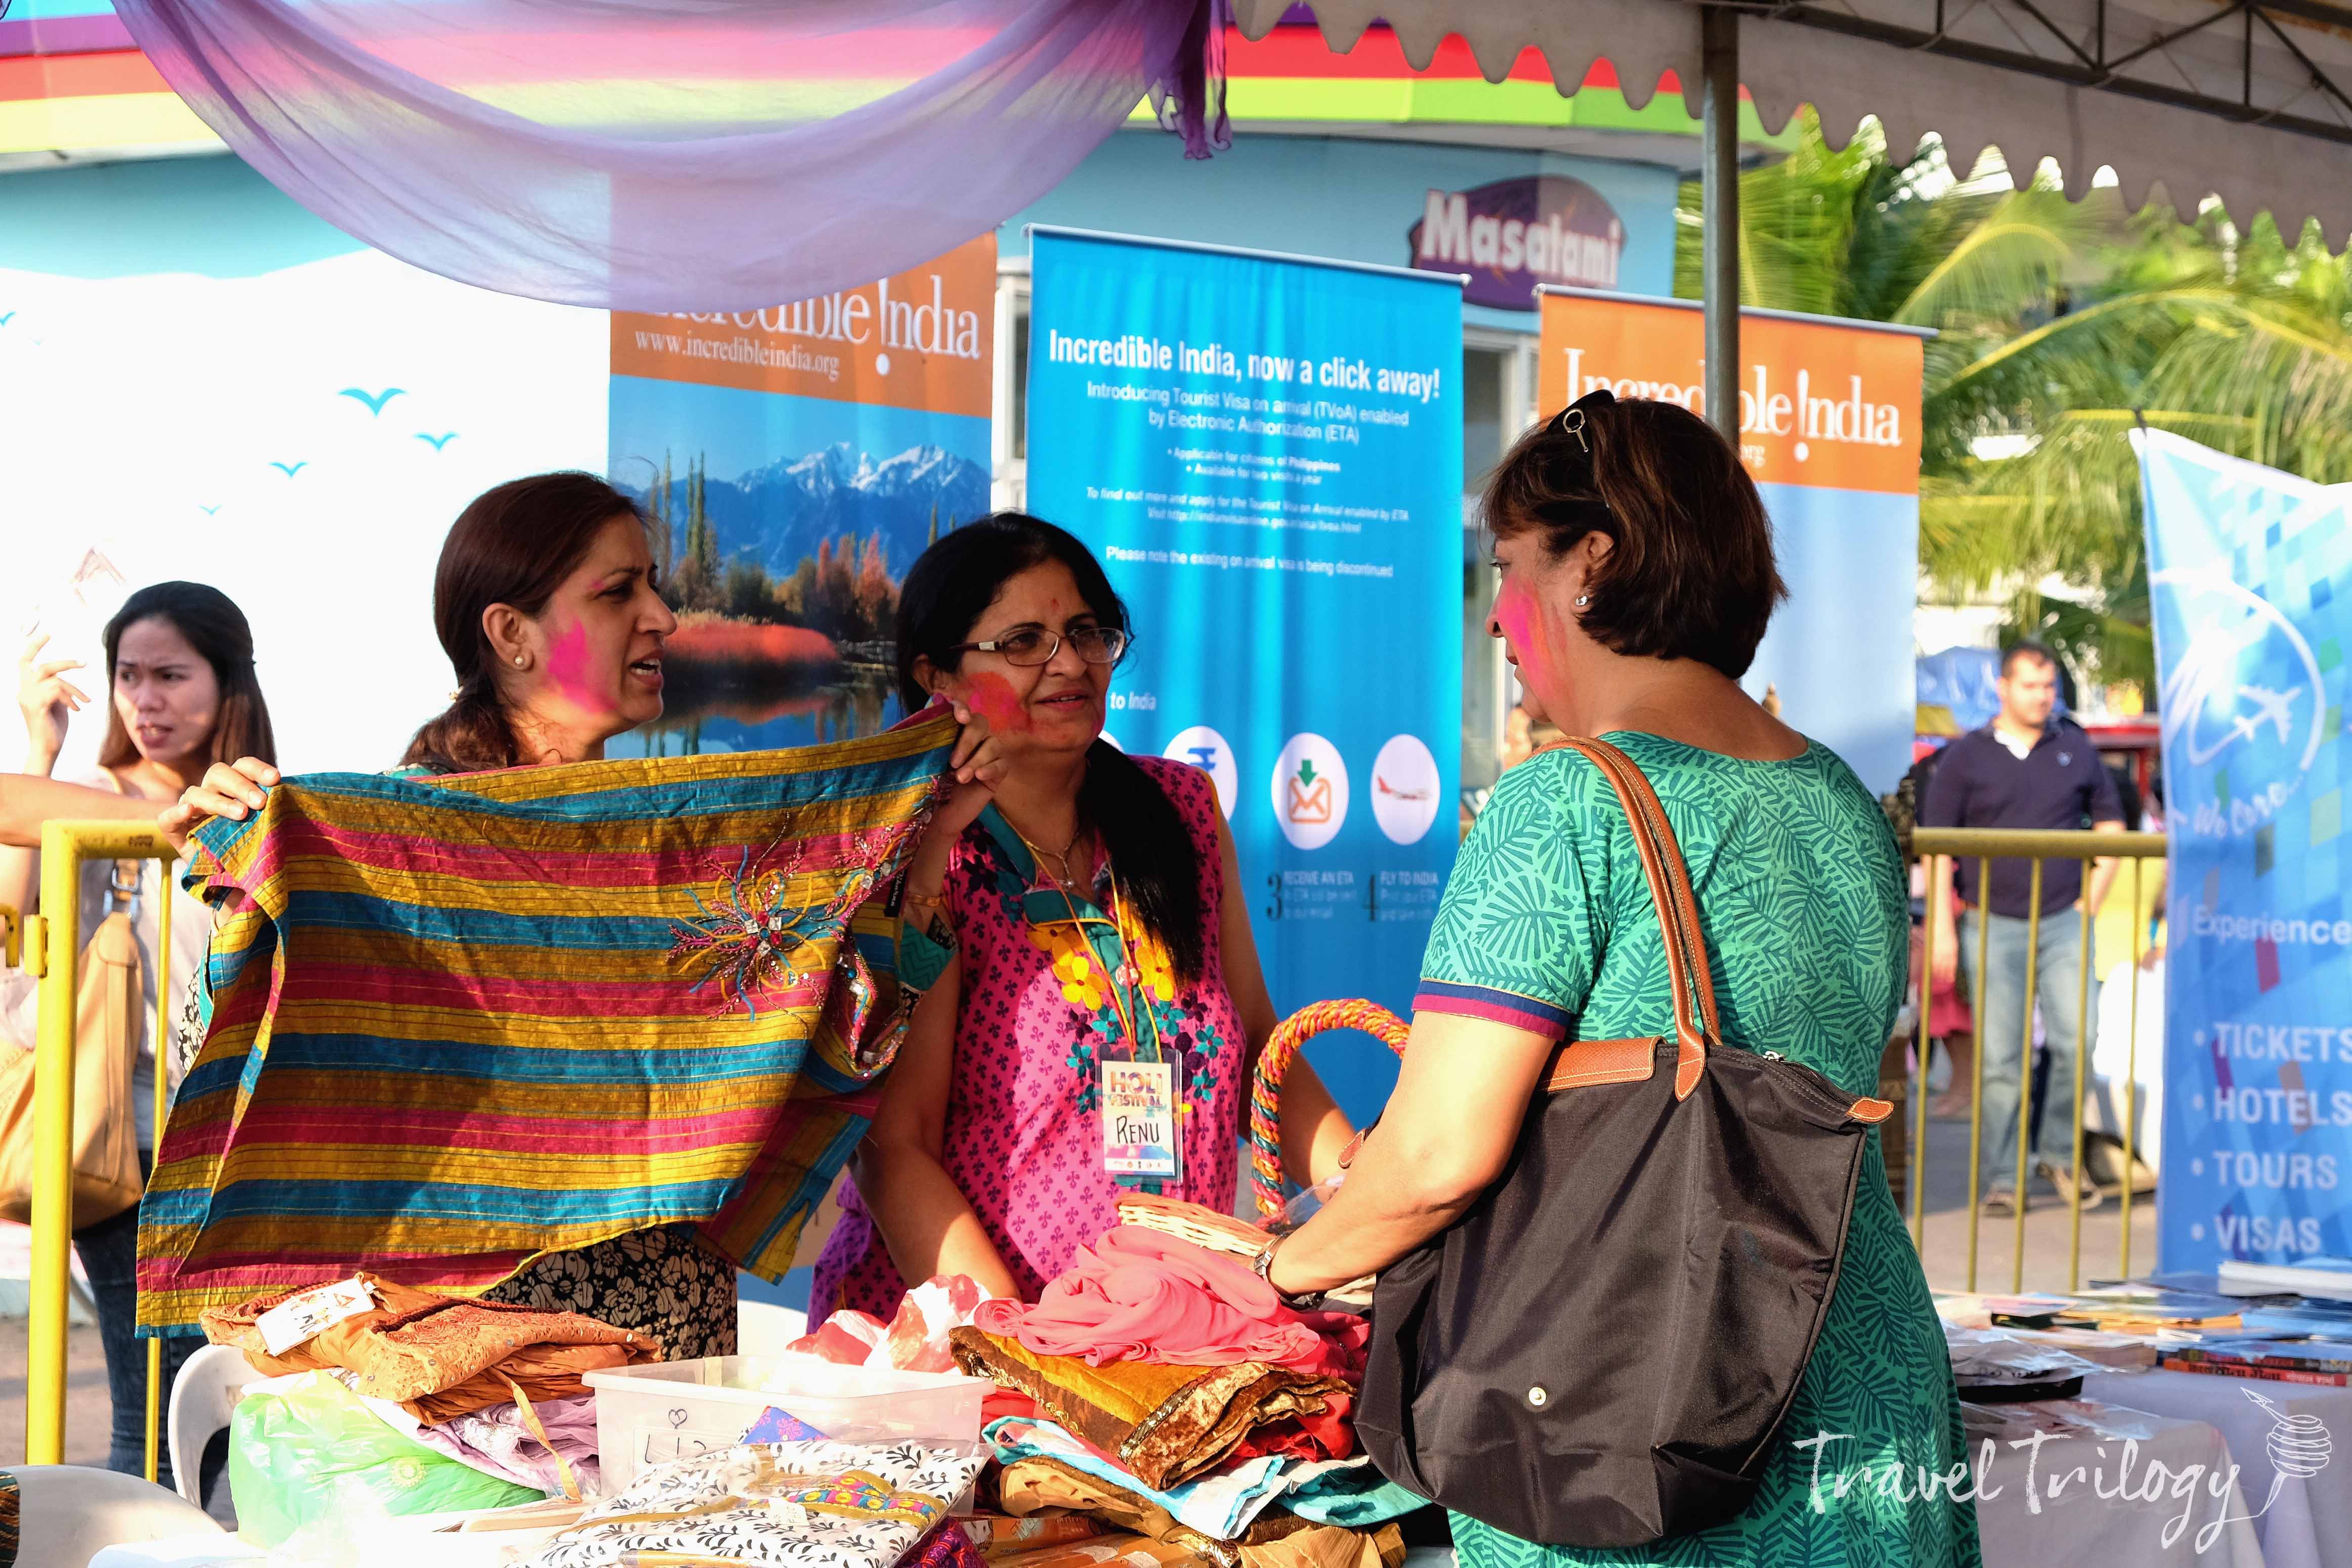 Exquisite Indian textiles up for sale during Holi Fest.